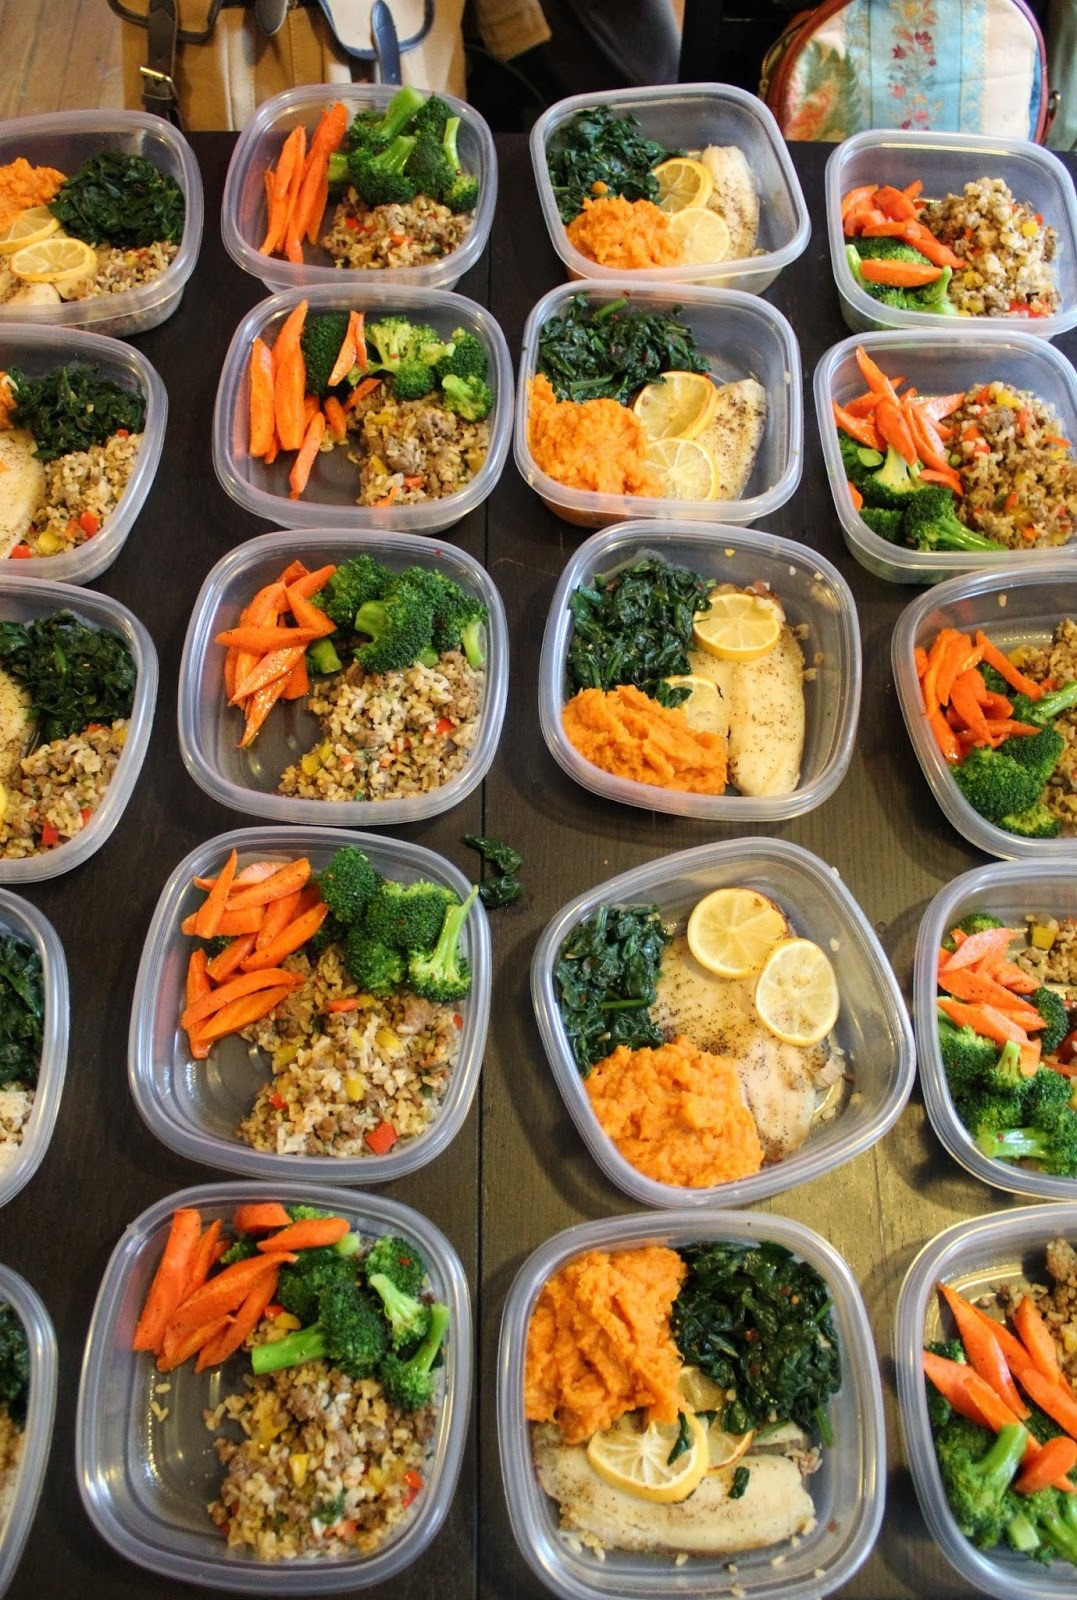 Dinners Ideas For The Week
 Healthy Meal Prep Ideas For The WeekWritings and Papers